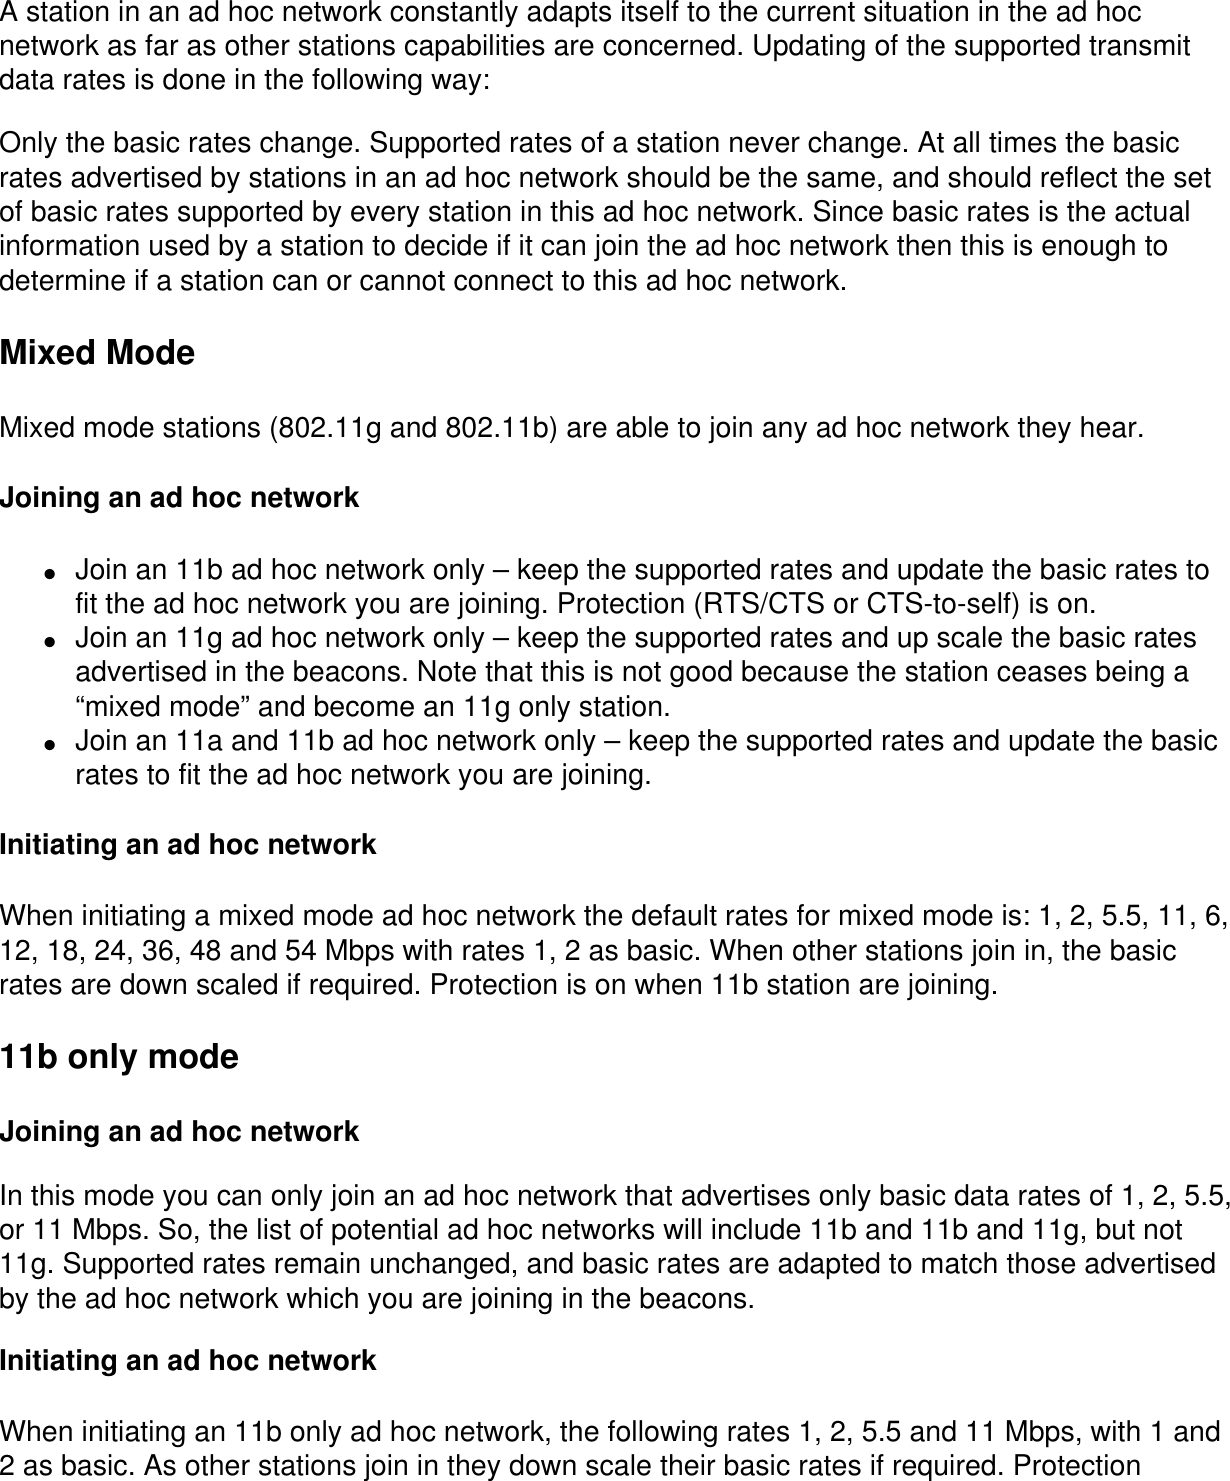 A station in an ad hoc network constantly adapts itself to the current situation in the ad hoc network as far as other stations capabilities are concerned. Updating of the supported transmit data rates is done in the following way:Only the basic rates change. Supported rates of a station never change. At all times the basic rates advertised by stations in an ad hoc network should be the same, and should reflect the set of basic rates supported by every station in this ad hoc network. Since basic rates is the actual information used by a station to decide if it can join the ad hoc network then this is enough to determine if a station can or cannot connect to this ad hoc network.Mixed ModeMixed mode stations (802.11g and 802.11b) are able to join any ad hoc network they hear. Joining an ad hoc network●     Join an 11b ad hoc network only – keep the supported rates and update the basic rates to fit the ad hoc network you are joining. Protection (RTS/CTS or CTS-to-self) is on.●     Join an 11g ad hoc network only – keep the supported rates and up scale the basic rates advertised in the beacons. Note that this is not good because the station ceases being a “mixed mode” and become an 11g only station. ●     Join an 11a and 11b ad hoc network only – keep the supported rates and update the basic rates to fit the ad hoc network you are joining.Initiating an ad hoc networkWhen initiating a mixed mode ad hoc network the default rates for mixed mode is: 1, 2, 5.5, 11, 6, 12, 18, 24, 36, 48 and 54 Mbps with rates 1, 2 as basic. When other stations join in, the basic rates are down scaled if required. Protection is on when 11b station are joining.11b only modeJoining an ad hoc networkIn this mode you can only join an ad hoc network that advertises only basic data rates of 1, 2, 5.5, or 11 Mbps. So, the list of potential ad hoc networks will include 11b and 11b and 11g, but not 11g. Supported rates remain unchanged, and basic rates are adapted to match those advertised by the ad hoc network which you are joining in the beacons.Initiating an ad hoc networkWhen initiating an 11b only ad hoc network, the following rates 1, 2, 5.5 and 11 Mbps, with 1 and 2 as basic. As other stations join in they down scale their basic rates if required. Protection 